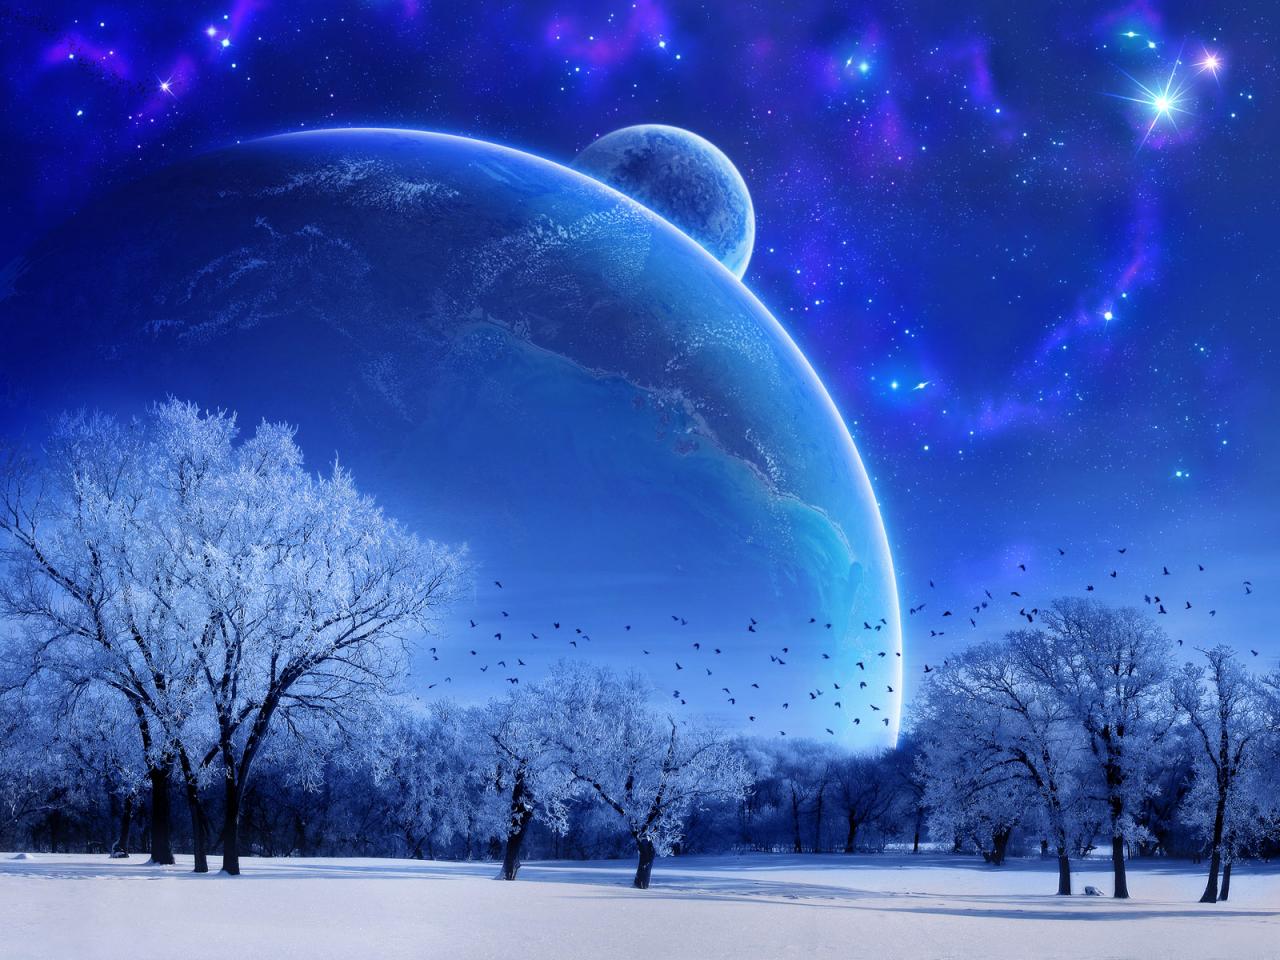 Planets and Stars Wallpaper - Pics about space